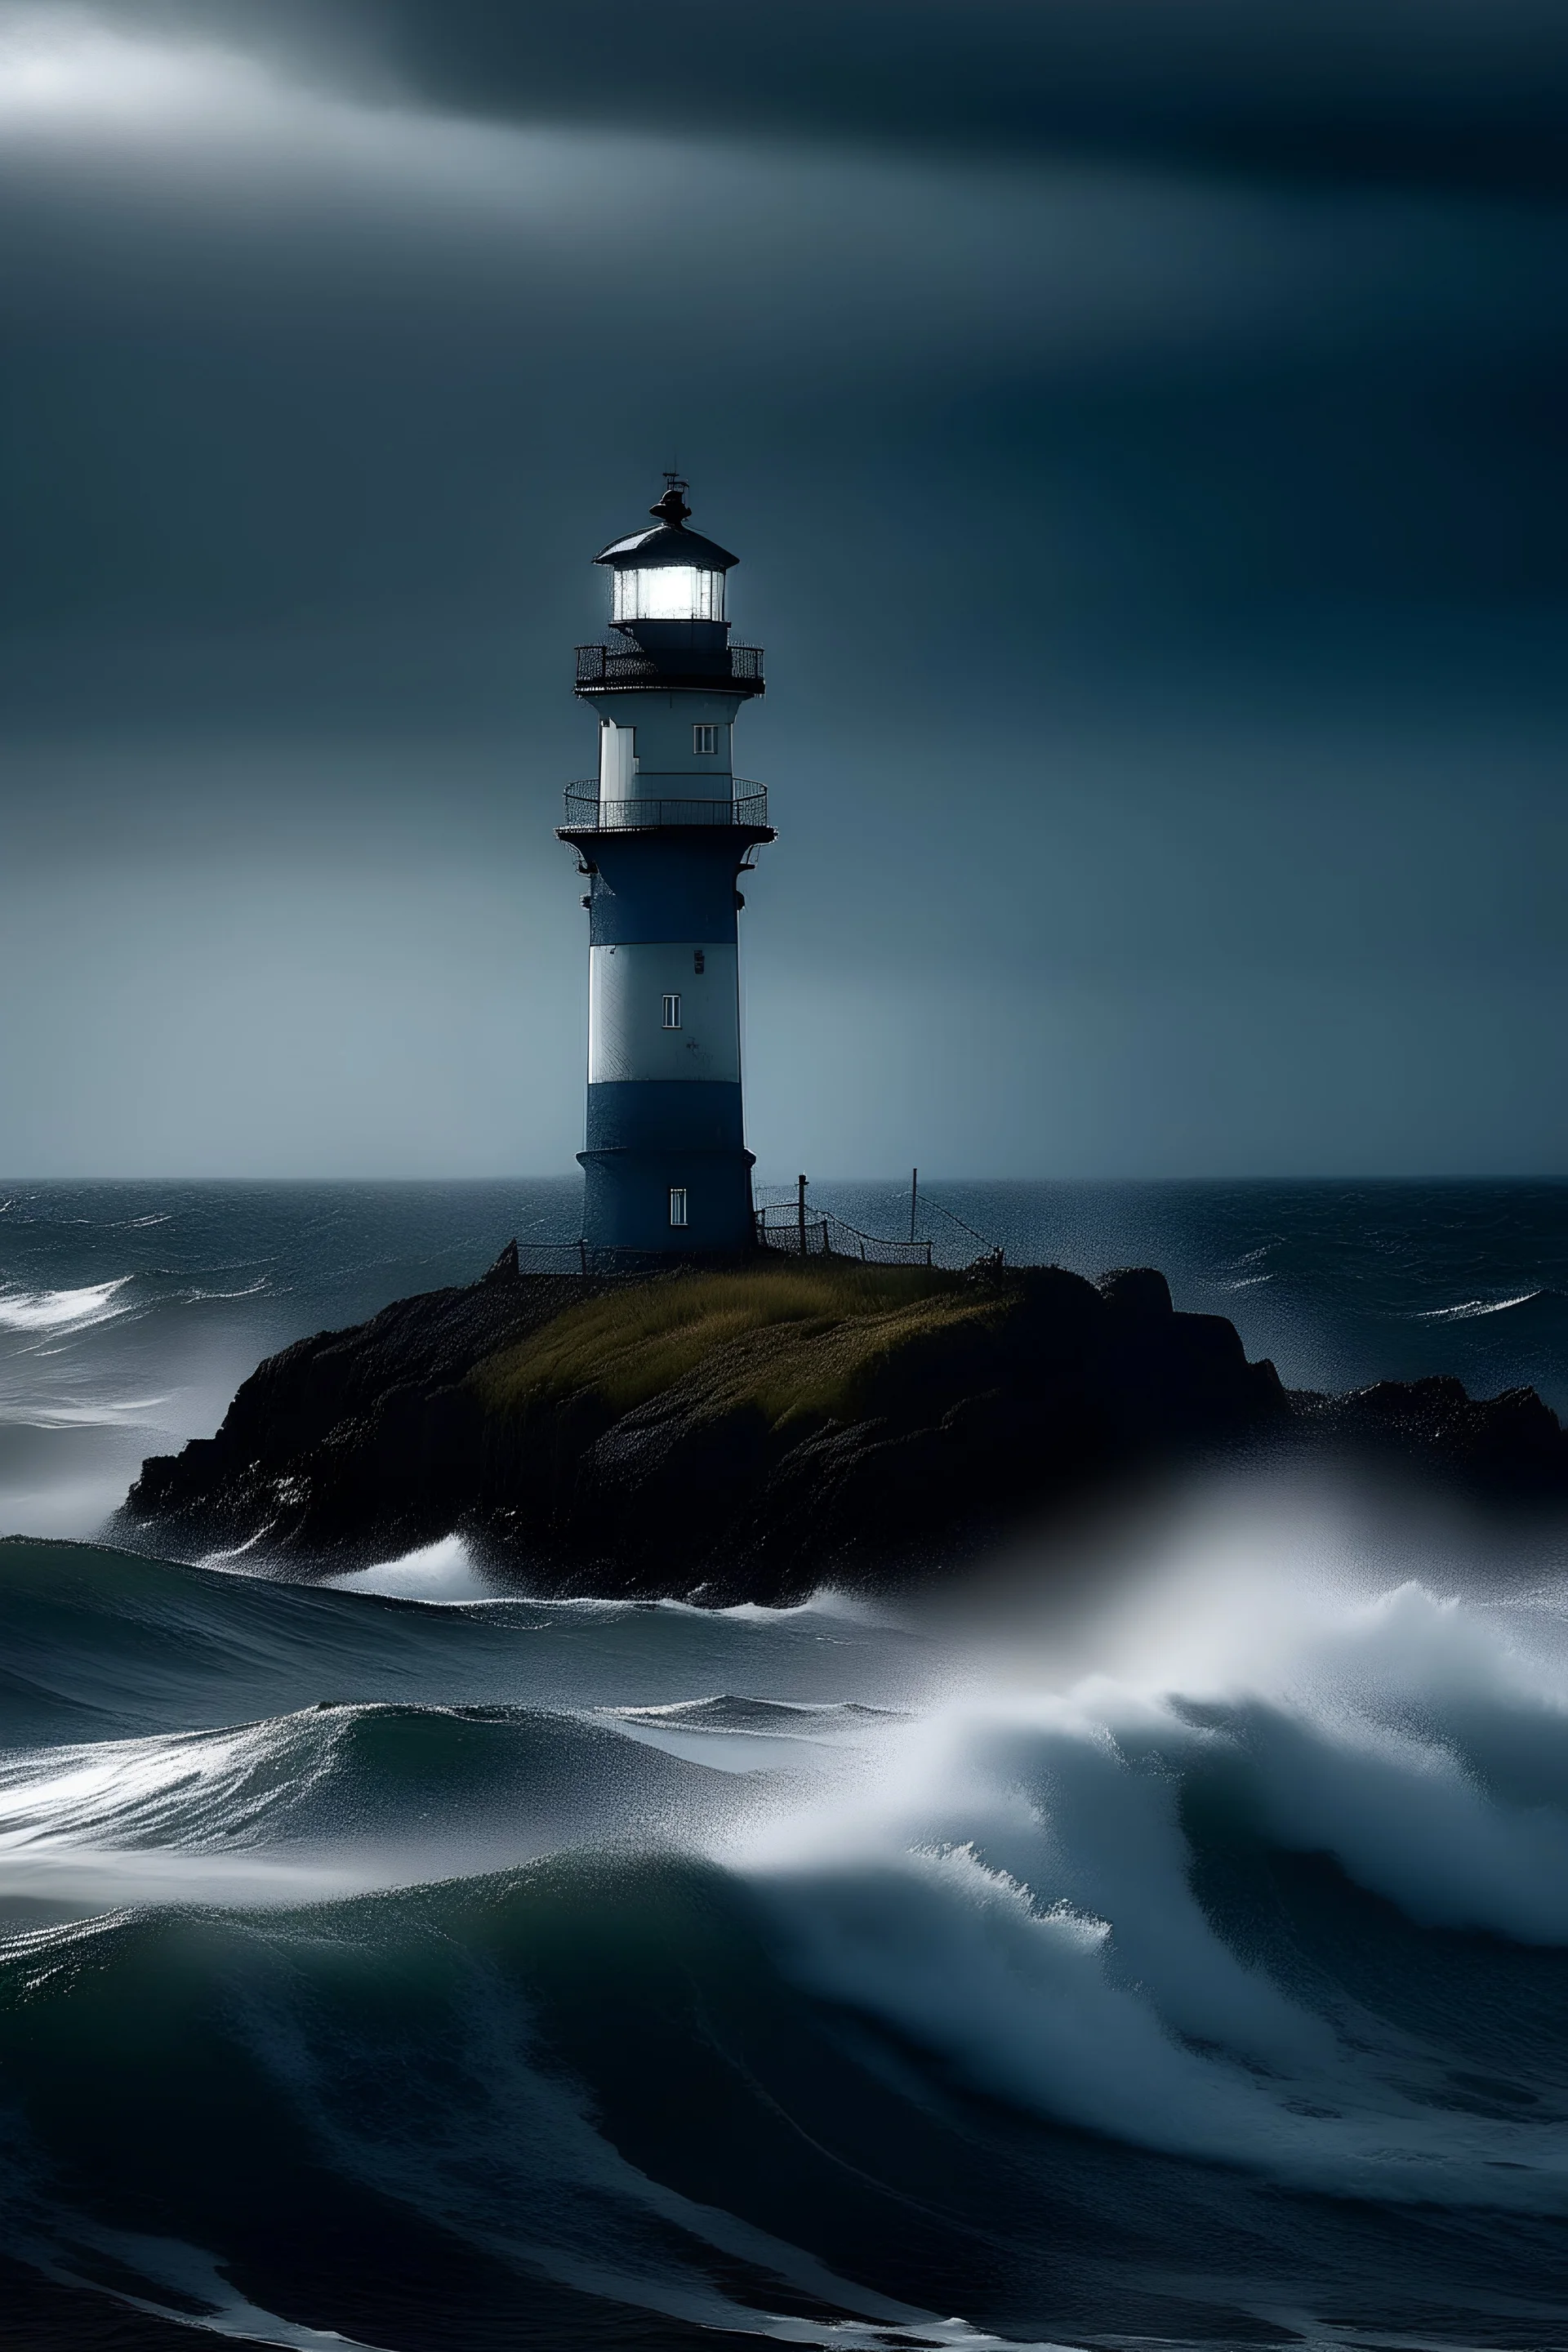 a solitary lighthouse standing tall against the backdrop of a stormy sea. The sky is painted with shades of deep indigo and gray, with flashes of lightning illuminating the horizon. Waves crash against rugged cliffs below, sending sprays of foam into the air. Despite the fierce elements, the lighthouse stands firm, its beacon cutting through the darkness, offering guidance and hope to sailors navigating the treacherous waters. It's a scene of resilience, power, and the enduring beauty of nature.